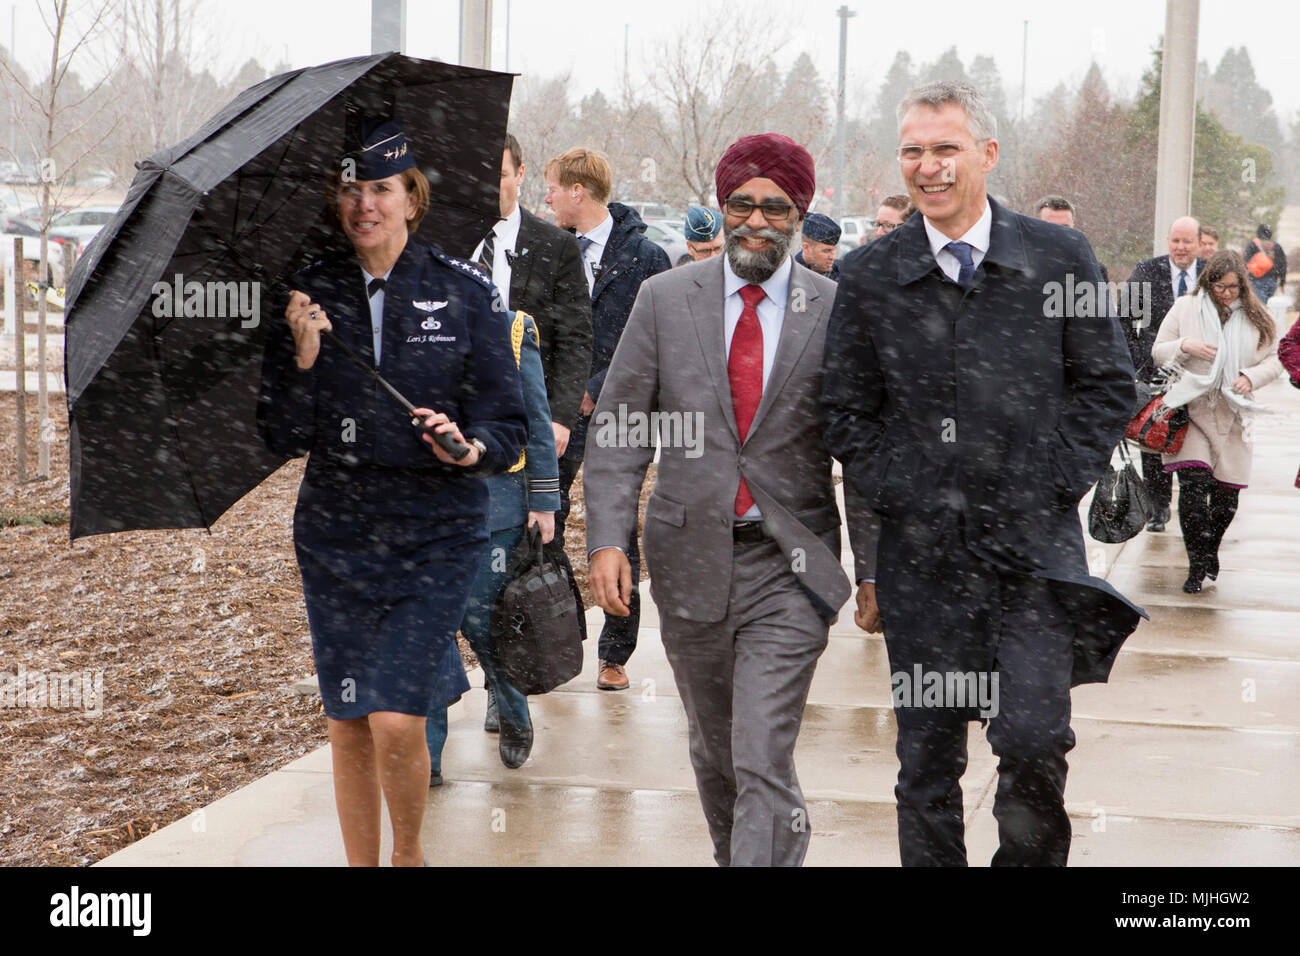 U.S. Air Force Lori J. Robinson, commander of the North American Aerospace Defense Command and U.S. Northern Command, Canadian Minister of National Defence Harjit Sajjan and NATO Secretary General Jens Stoltenberg walk into the commands’ headquarters building during an unexpected snow storm in Colorado Springs, Colorado, April 6. During their visit to the commands, the three leaders discussed their collective support and commitment to the defense of North America, as well as their gratitude for the opportunity to meet in-person and learn more about each other's respective mission-sets and prio Stock Photo